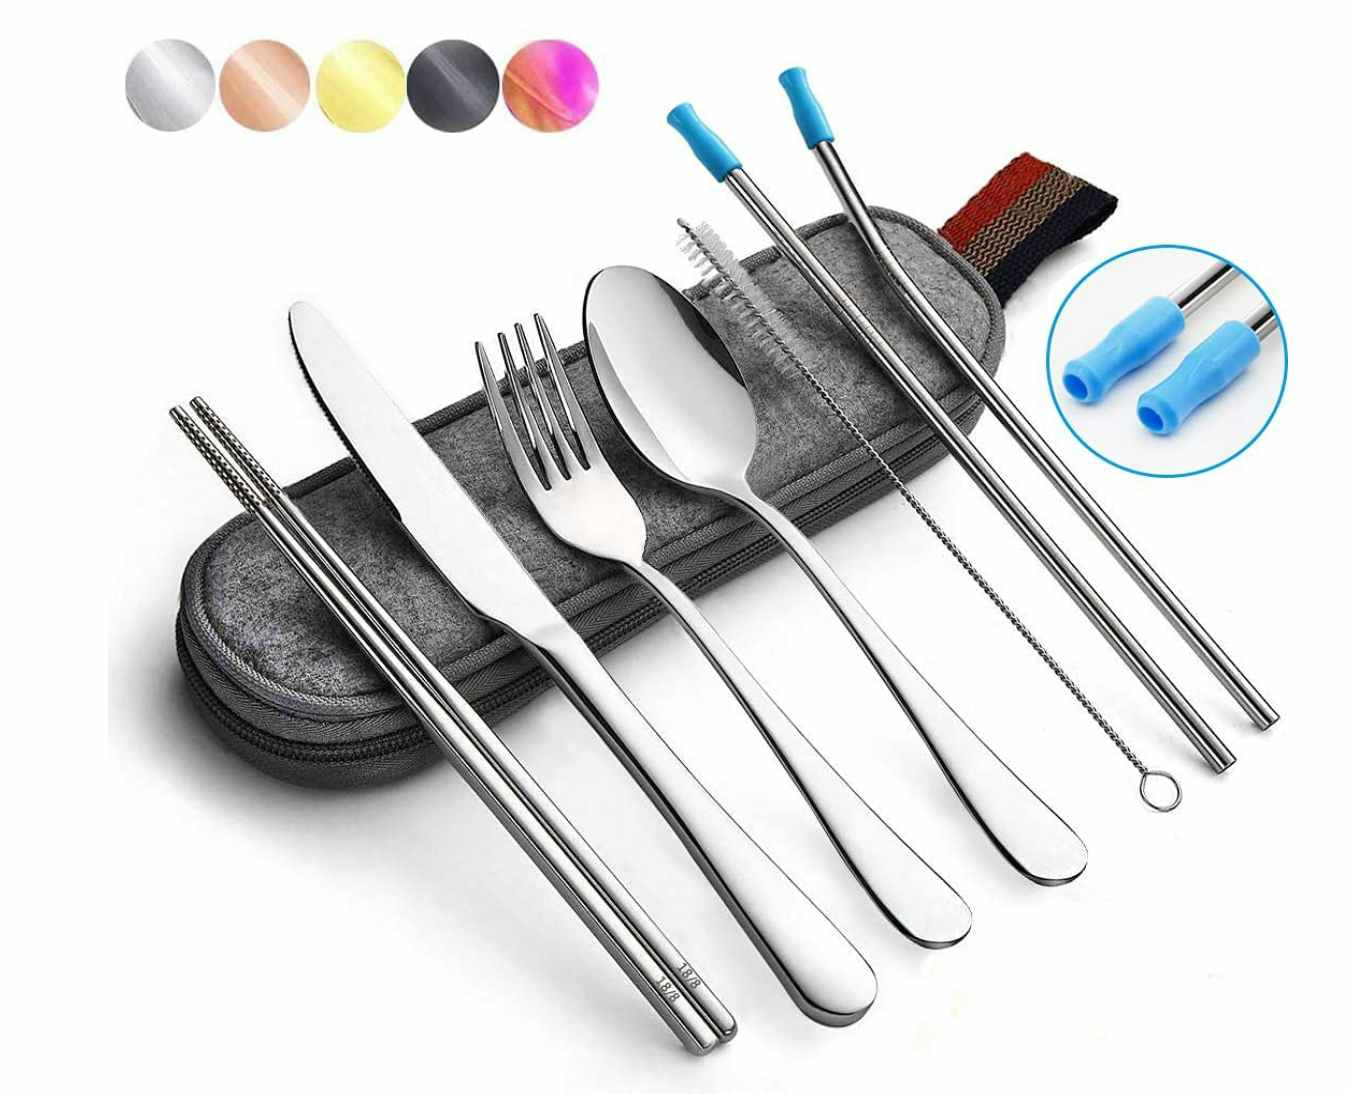 Silver utensils and grey case on a white background